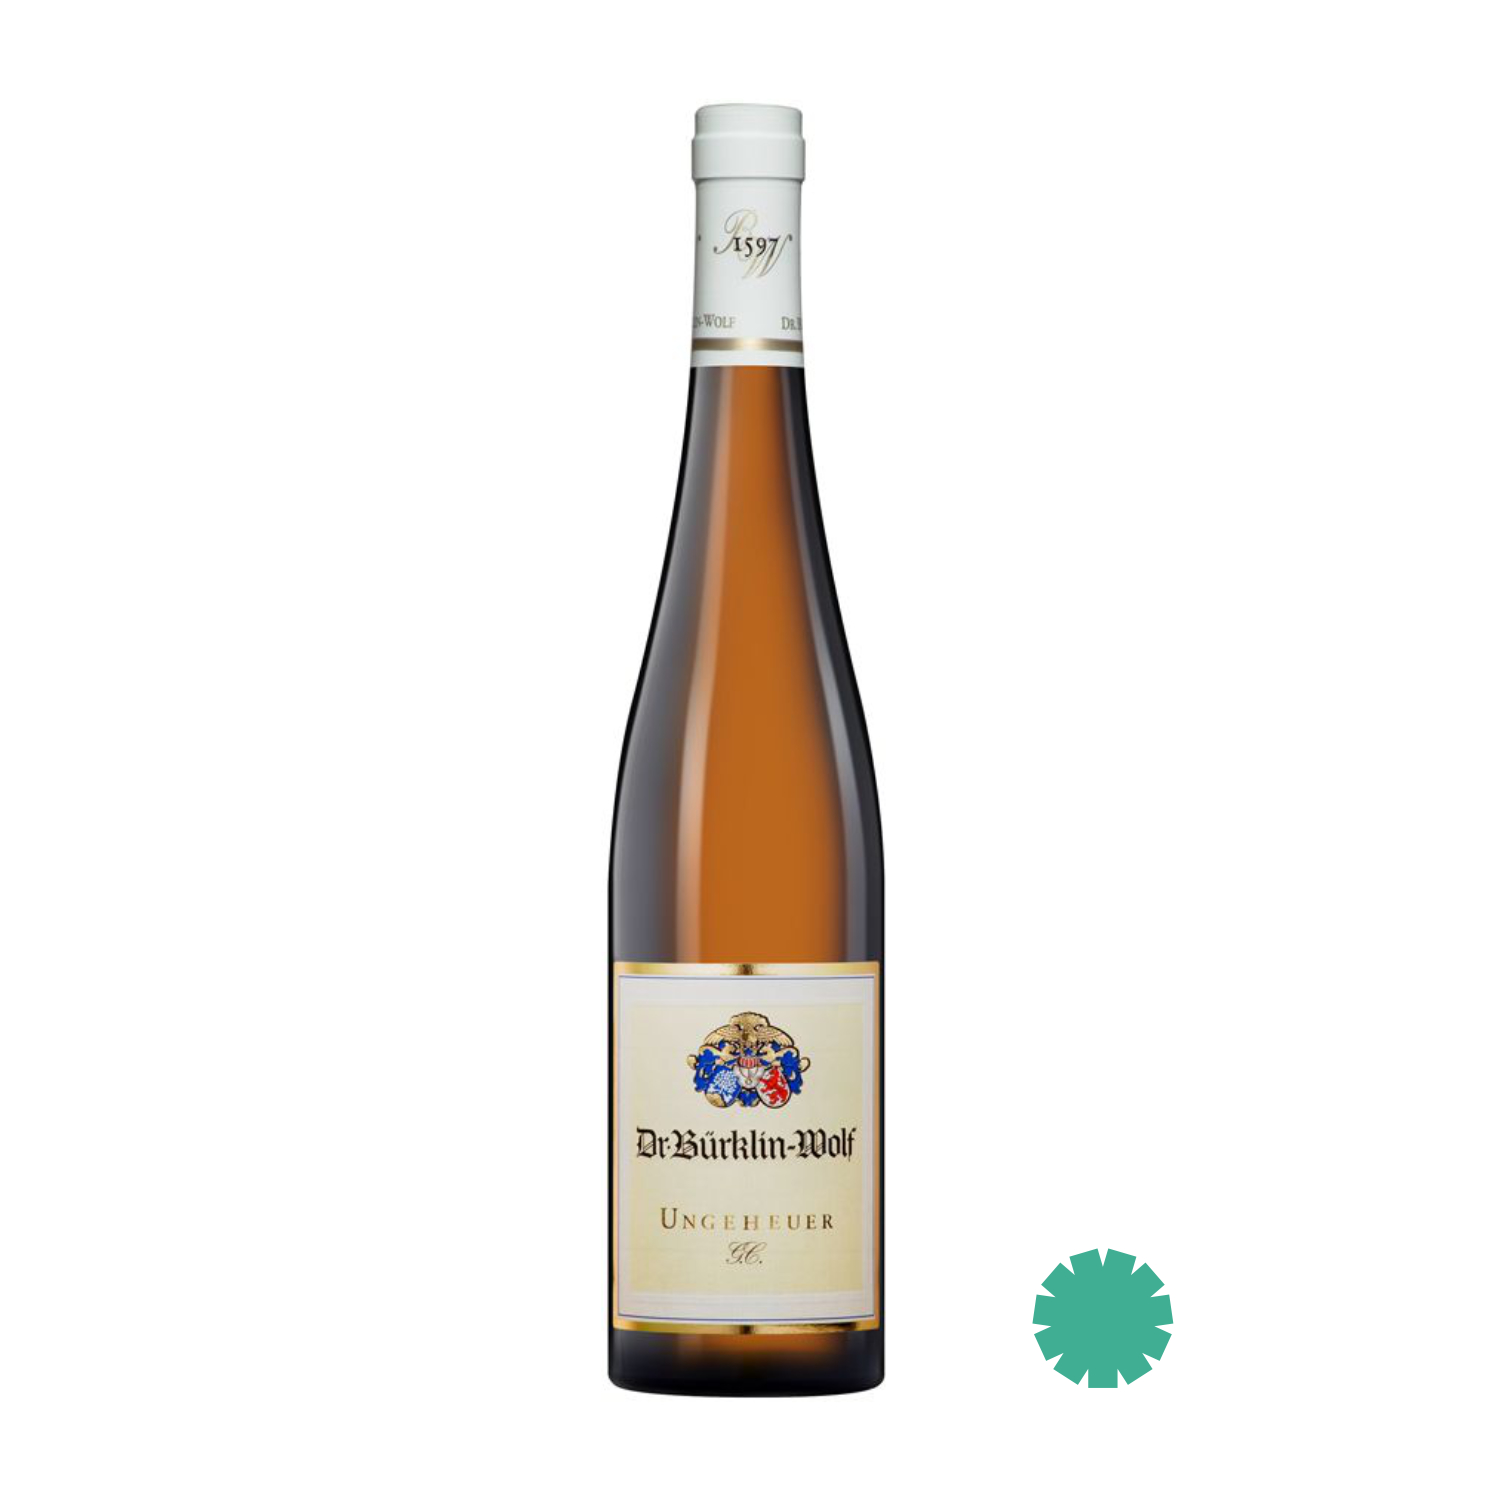 Ungeheuer GC Riesling 2016